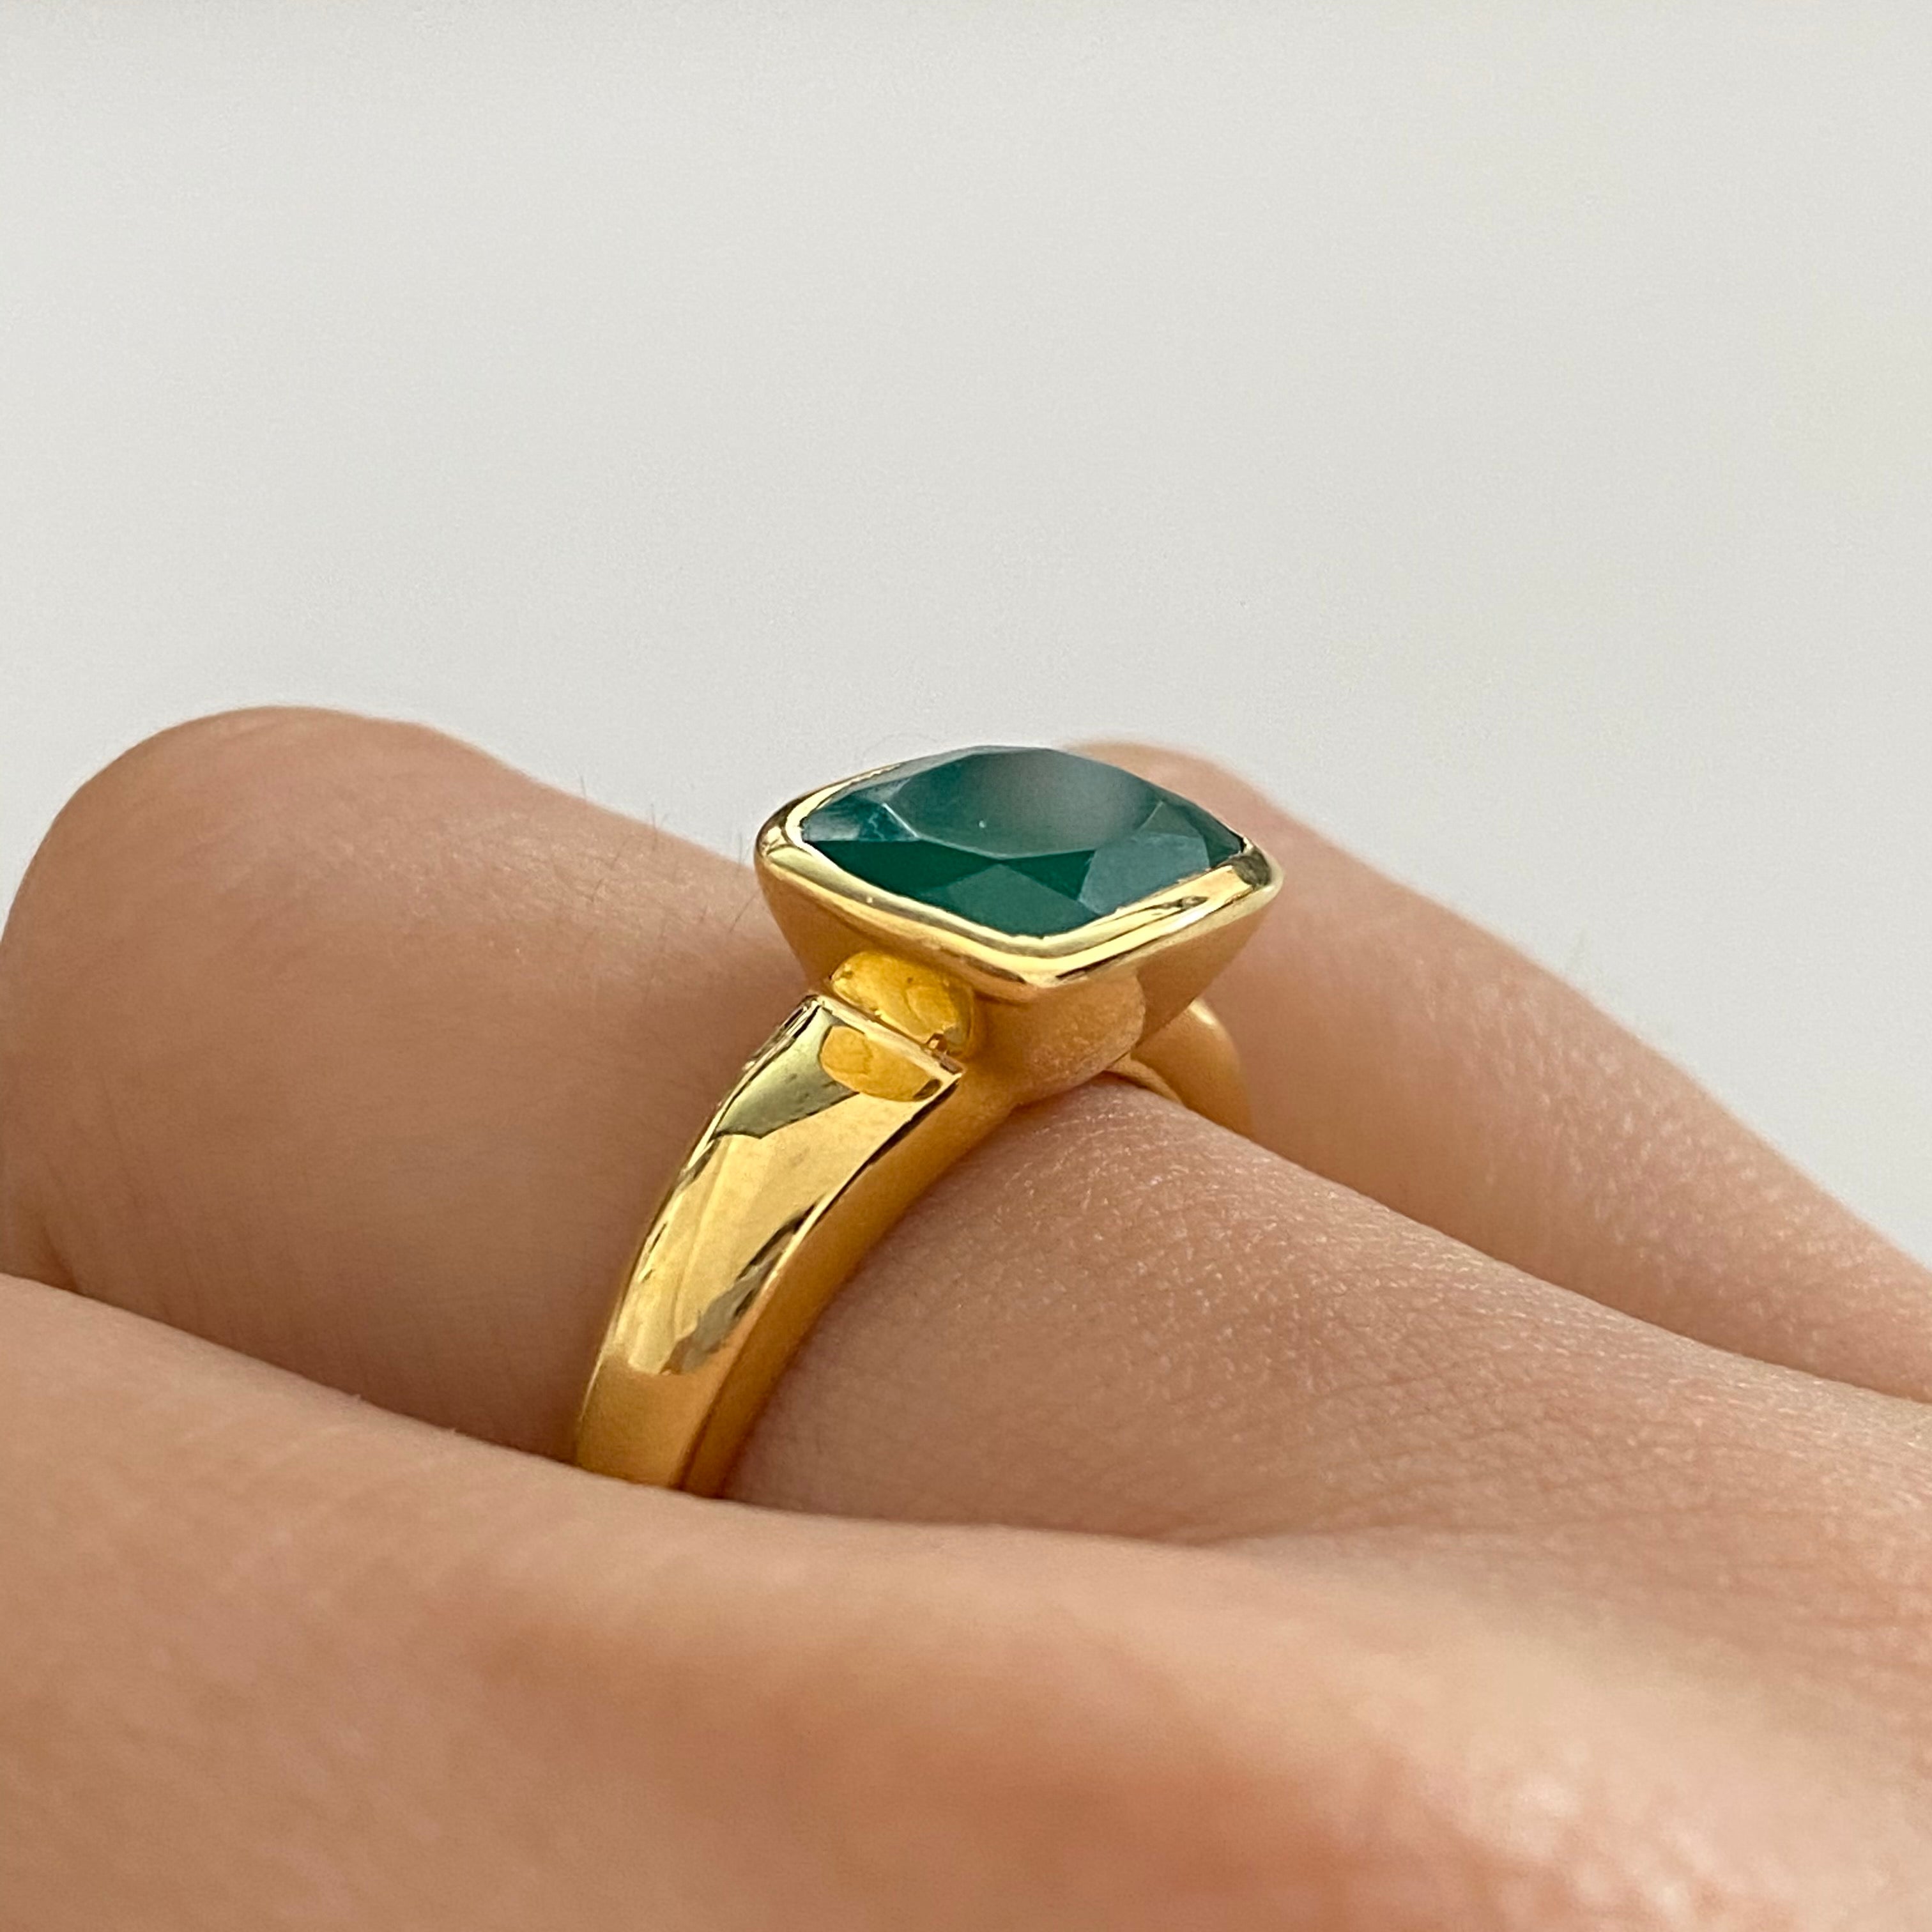 Faceted Rectangular Cut Natural Gemstone Gold Plated Sterling Silver Ring - Green Onyx